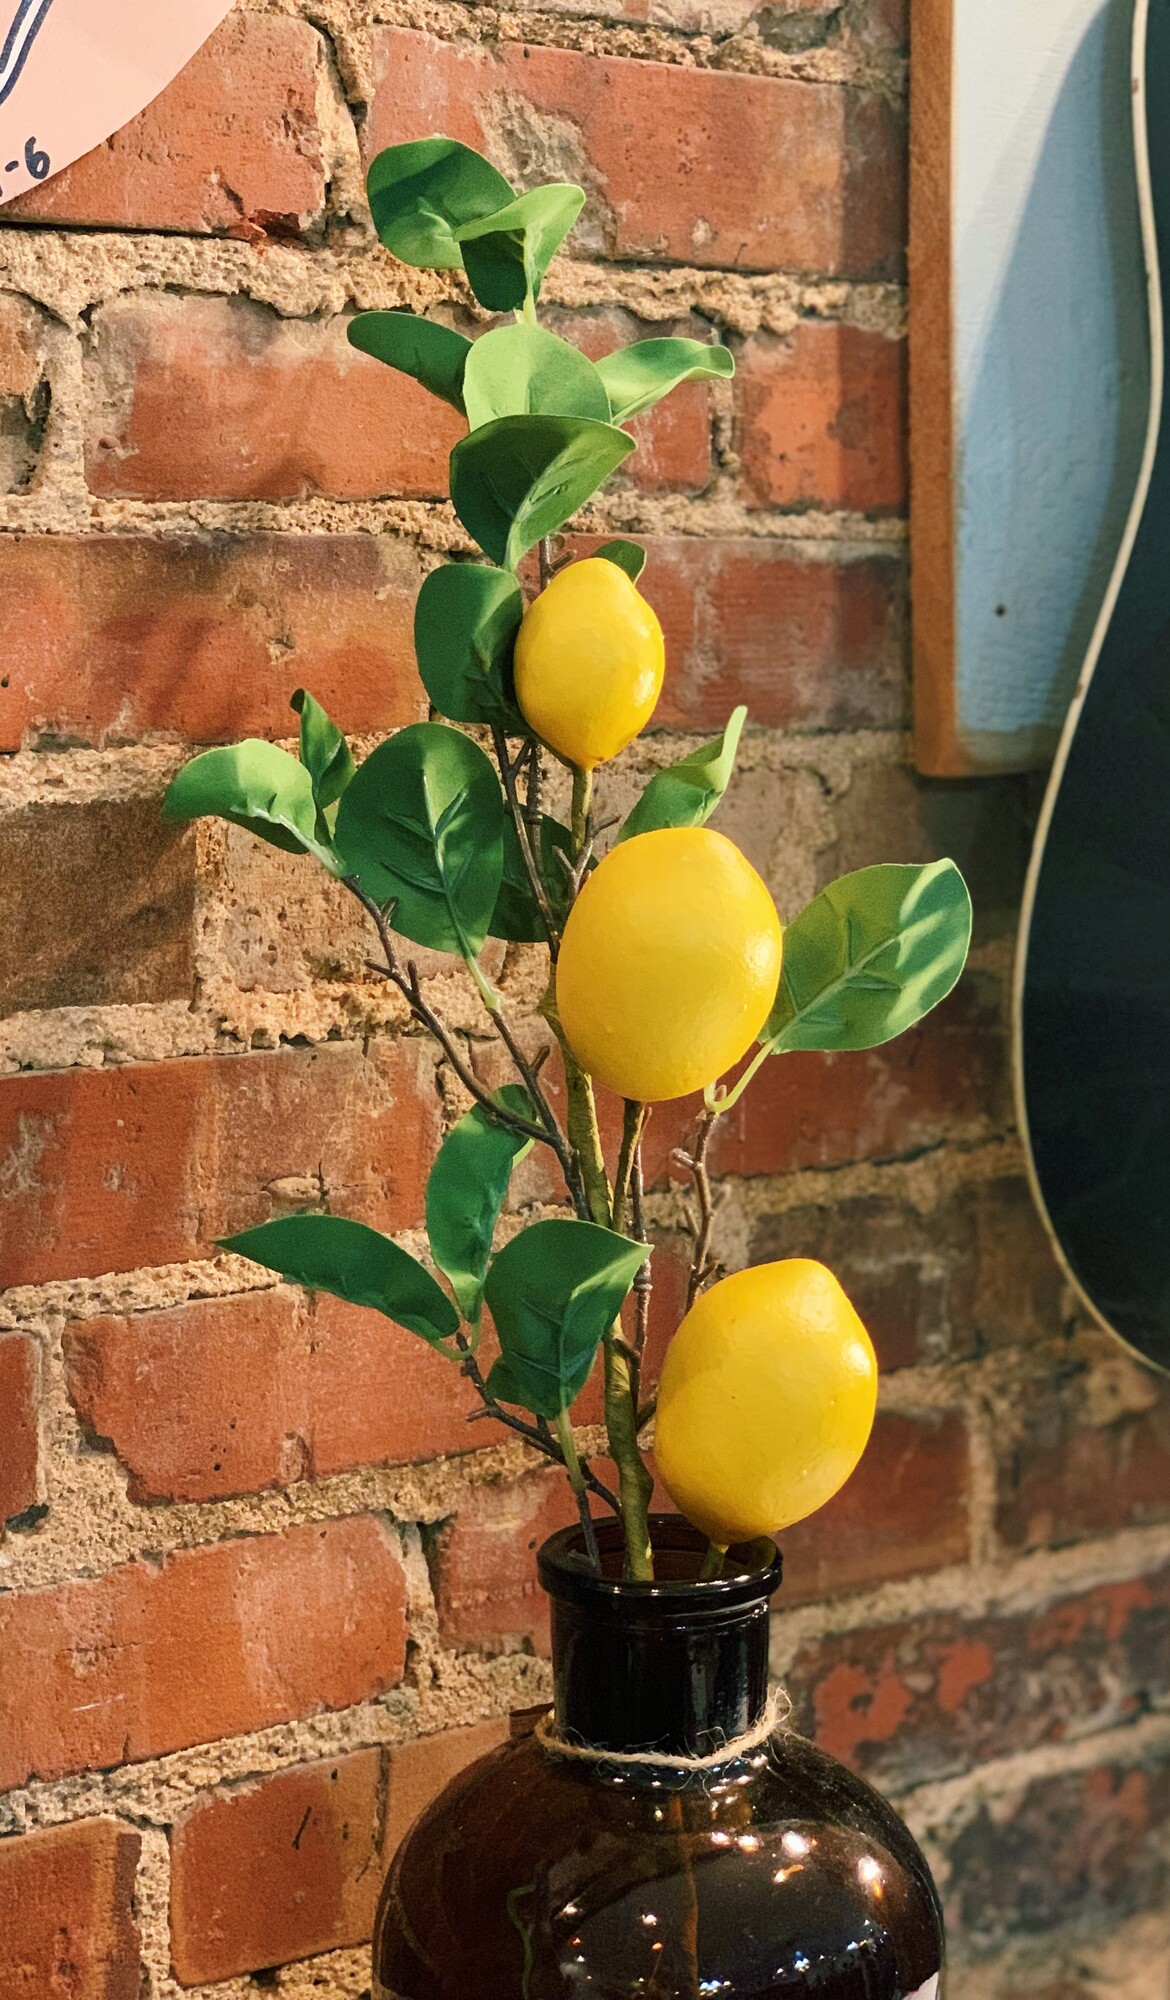 These bright and fun lemon stems measure about 2 feet long and are perfect for spring and summer time!